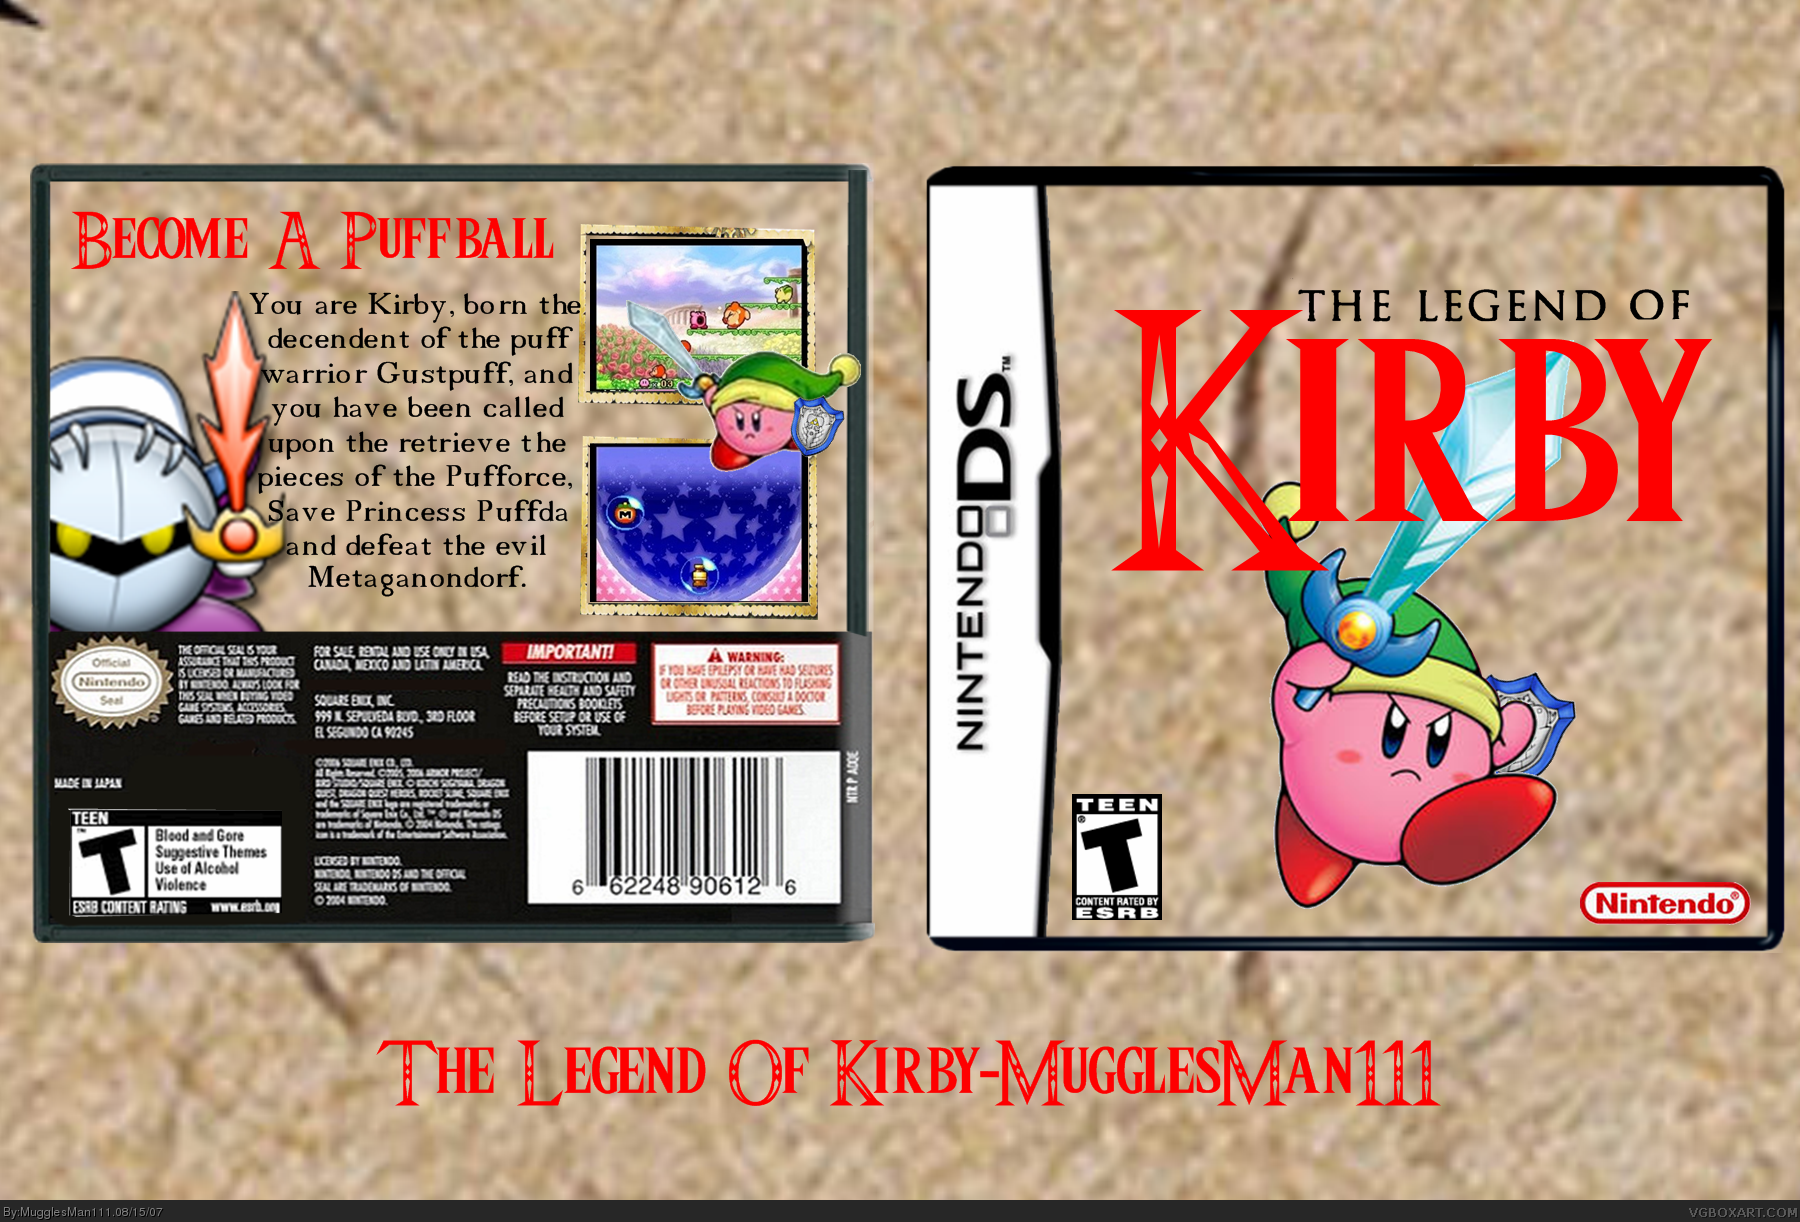 The Legend Of Kirby box cover